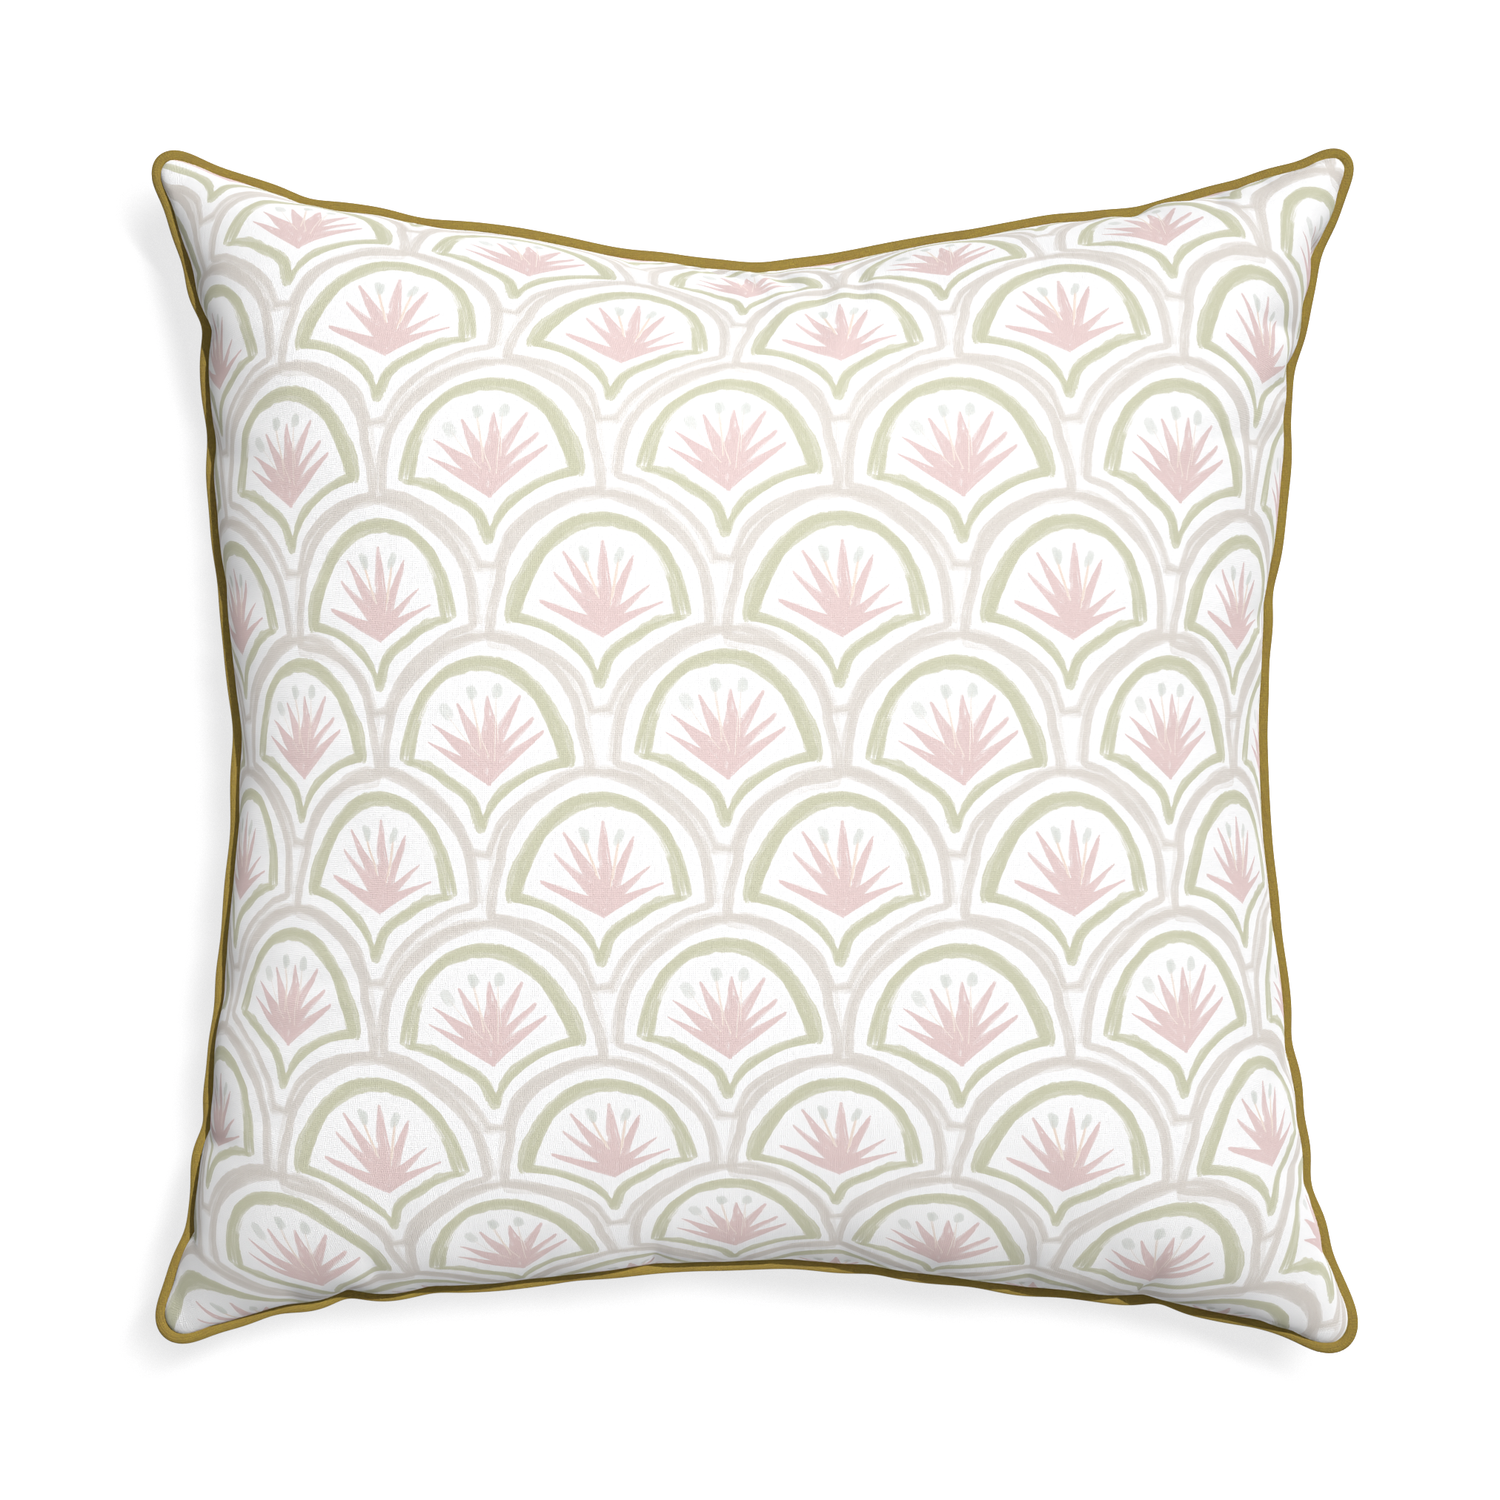 Euro-sham thatcher rose custom pink & green palmpillow with c piping on white background